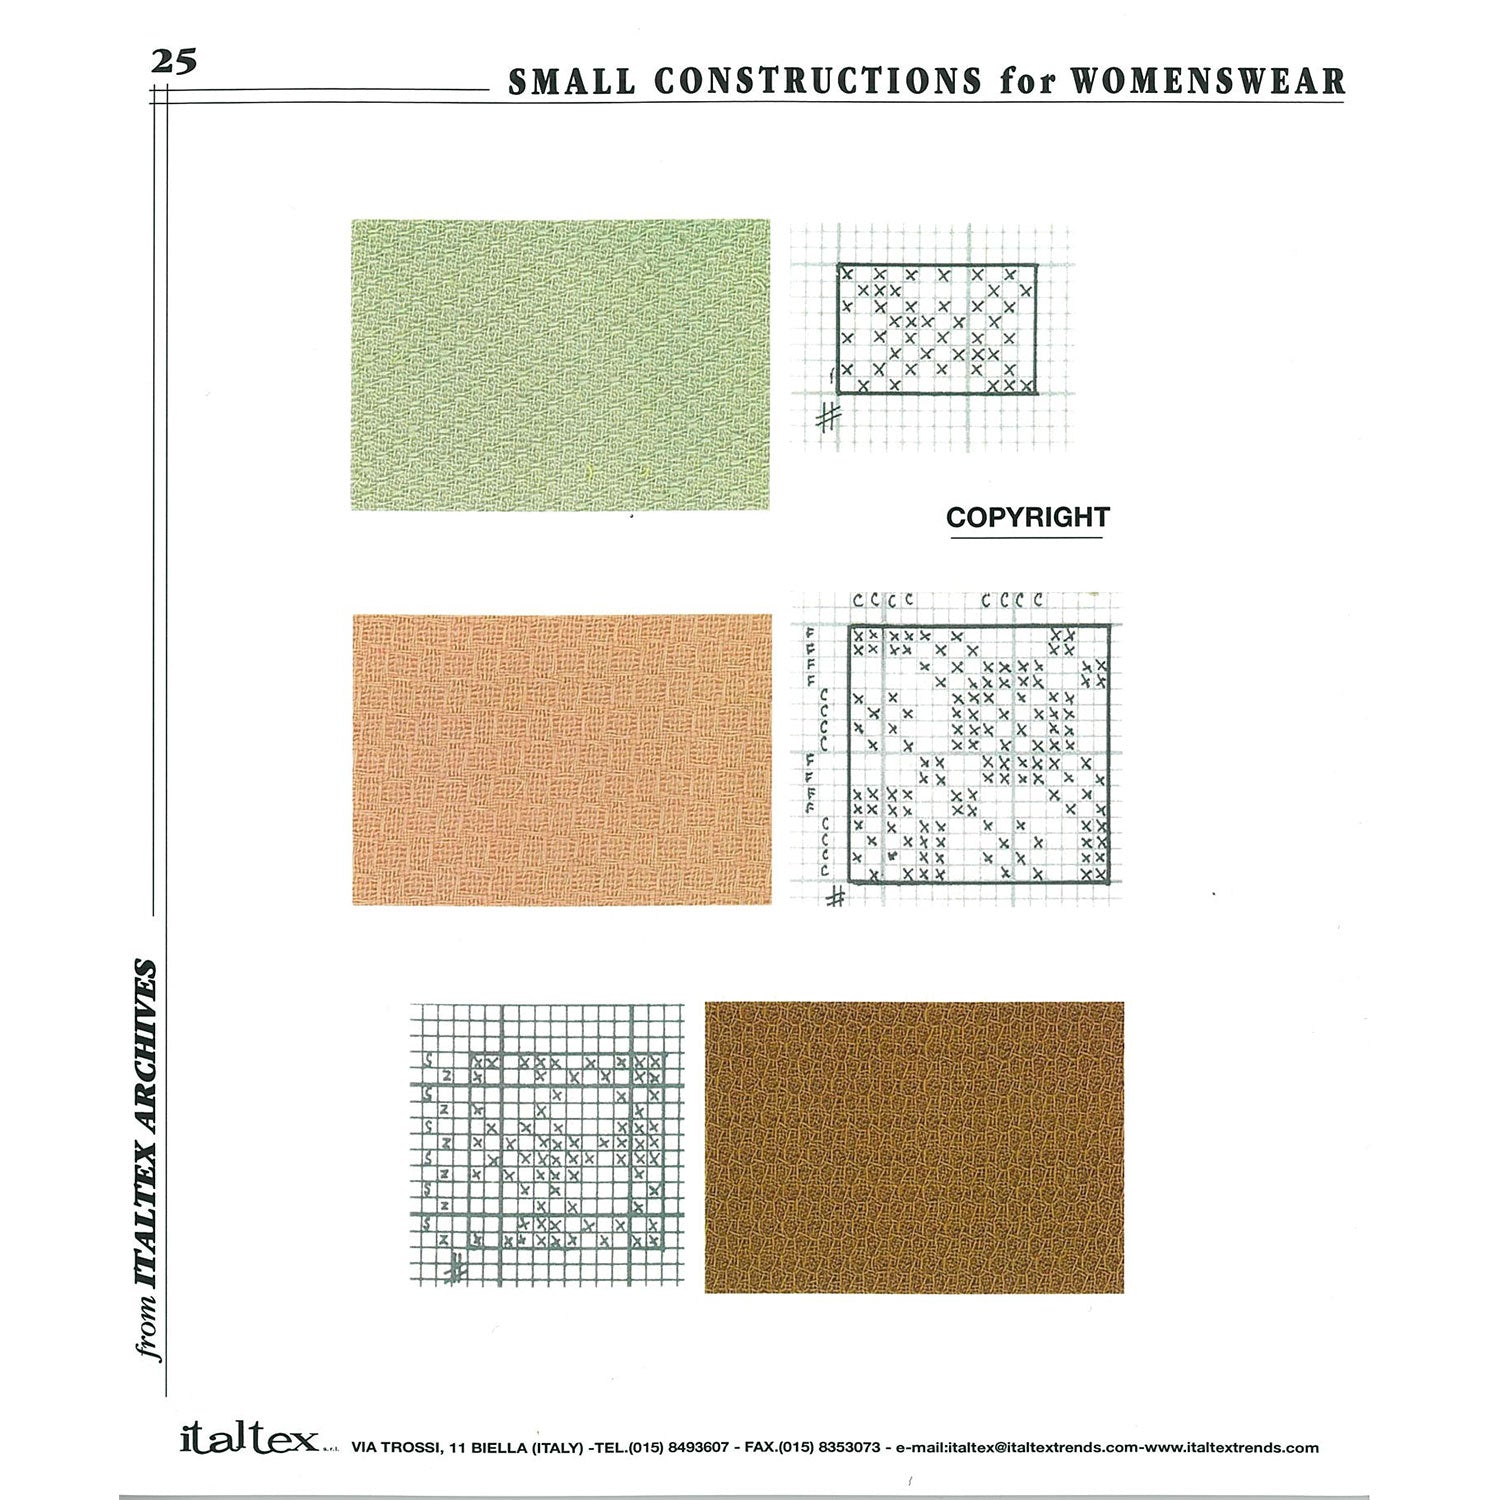 SMALL CONSTRUCTIONS for WOMENSWEAR. Vol.2